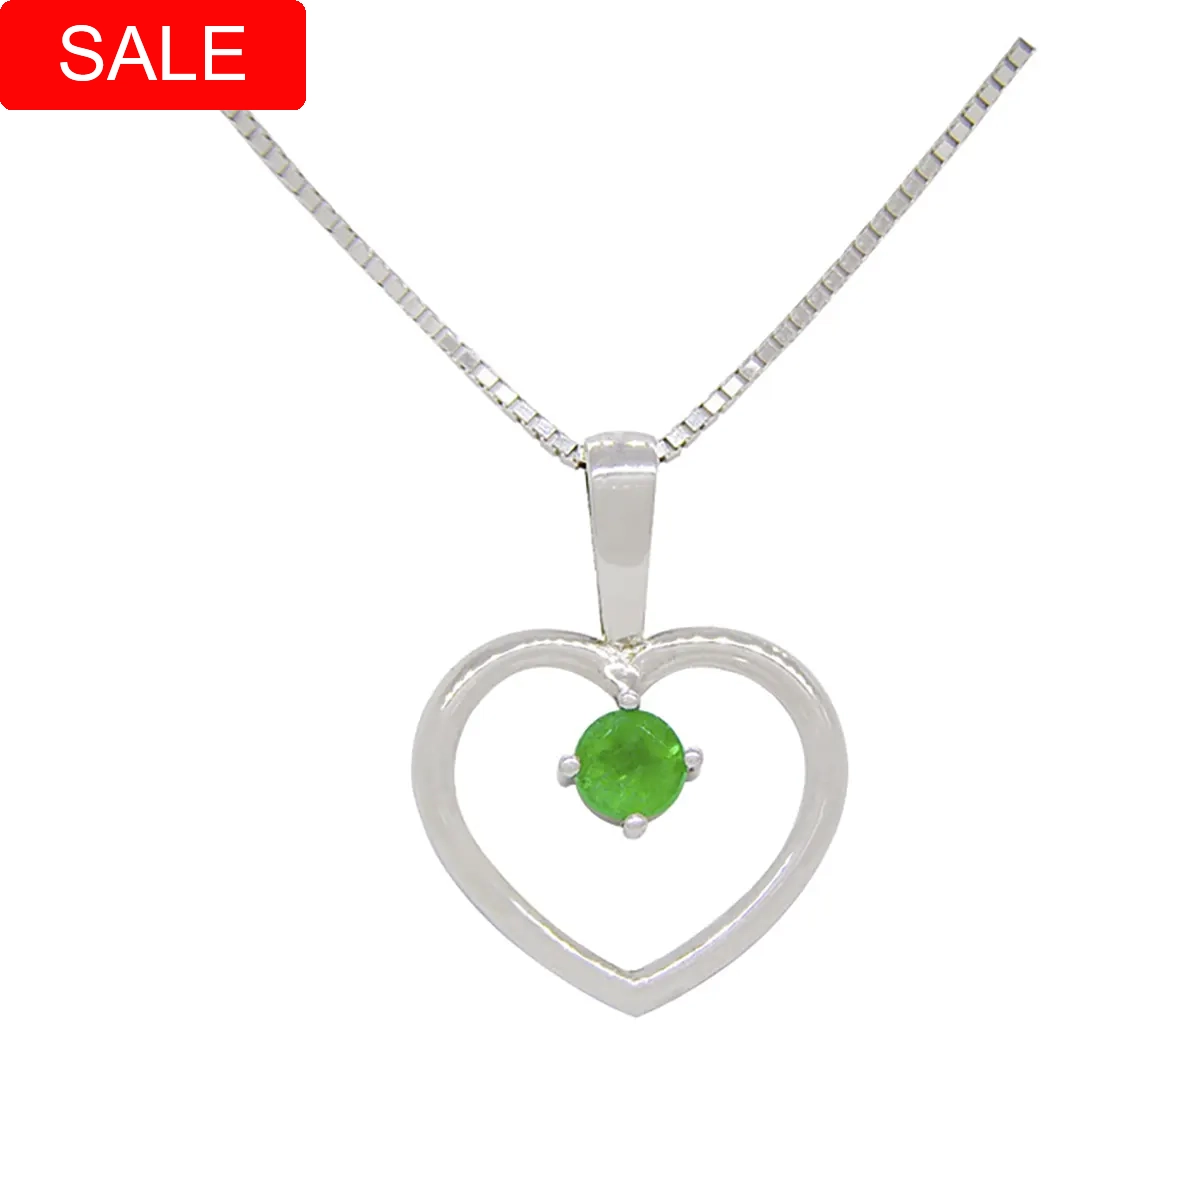 Heart-shaped pendant necklace in silver with 0.24 Ct. round cut natural emerald set in prongs